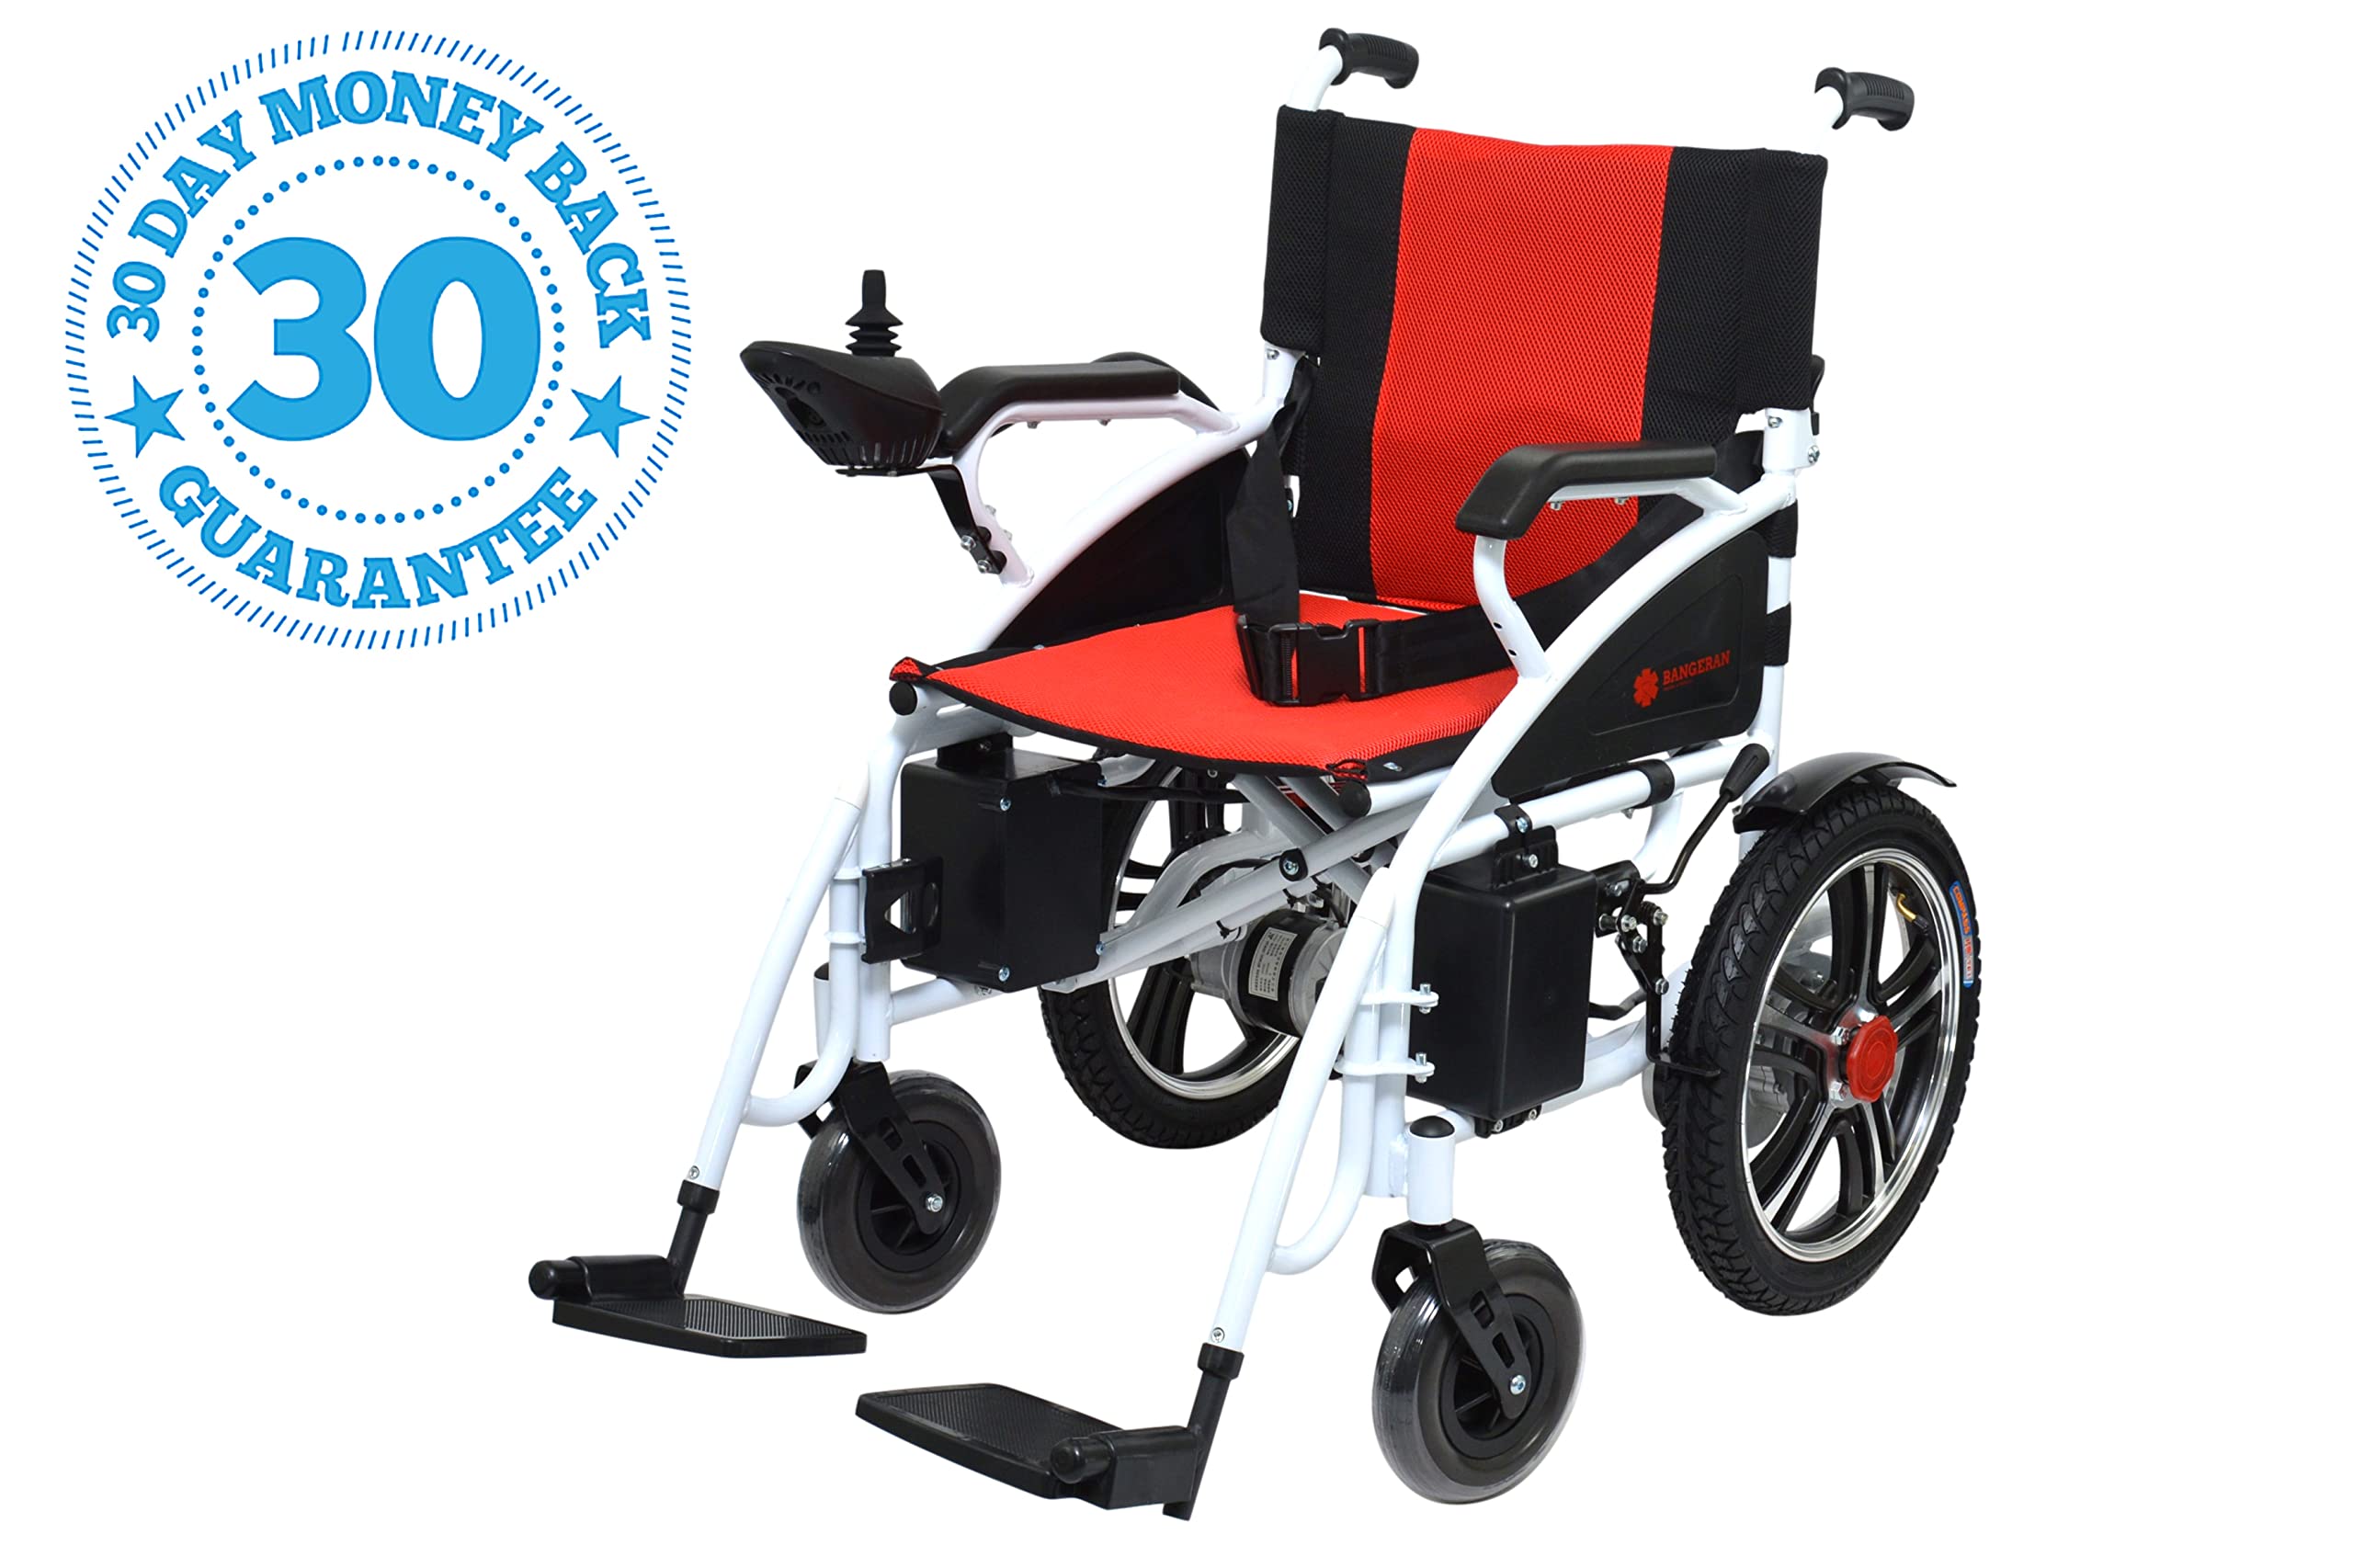 Mobilitas Z Foldable, Compact, Portable Electric Wheelchair for Adults and Seniors, Lightweight Power Wheelchair in Affordable Category, Silla de Ruedas Electrica, Dual Motor (White on Red)